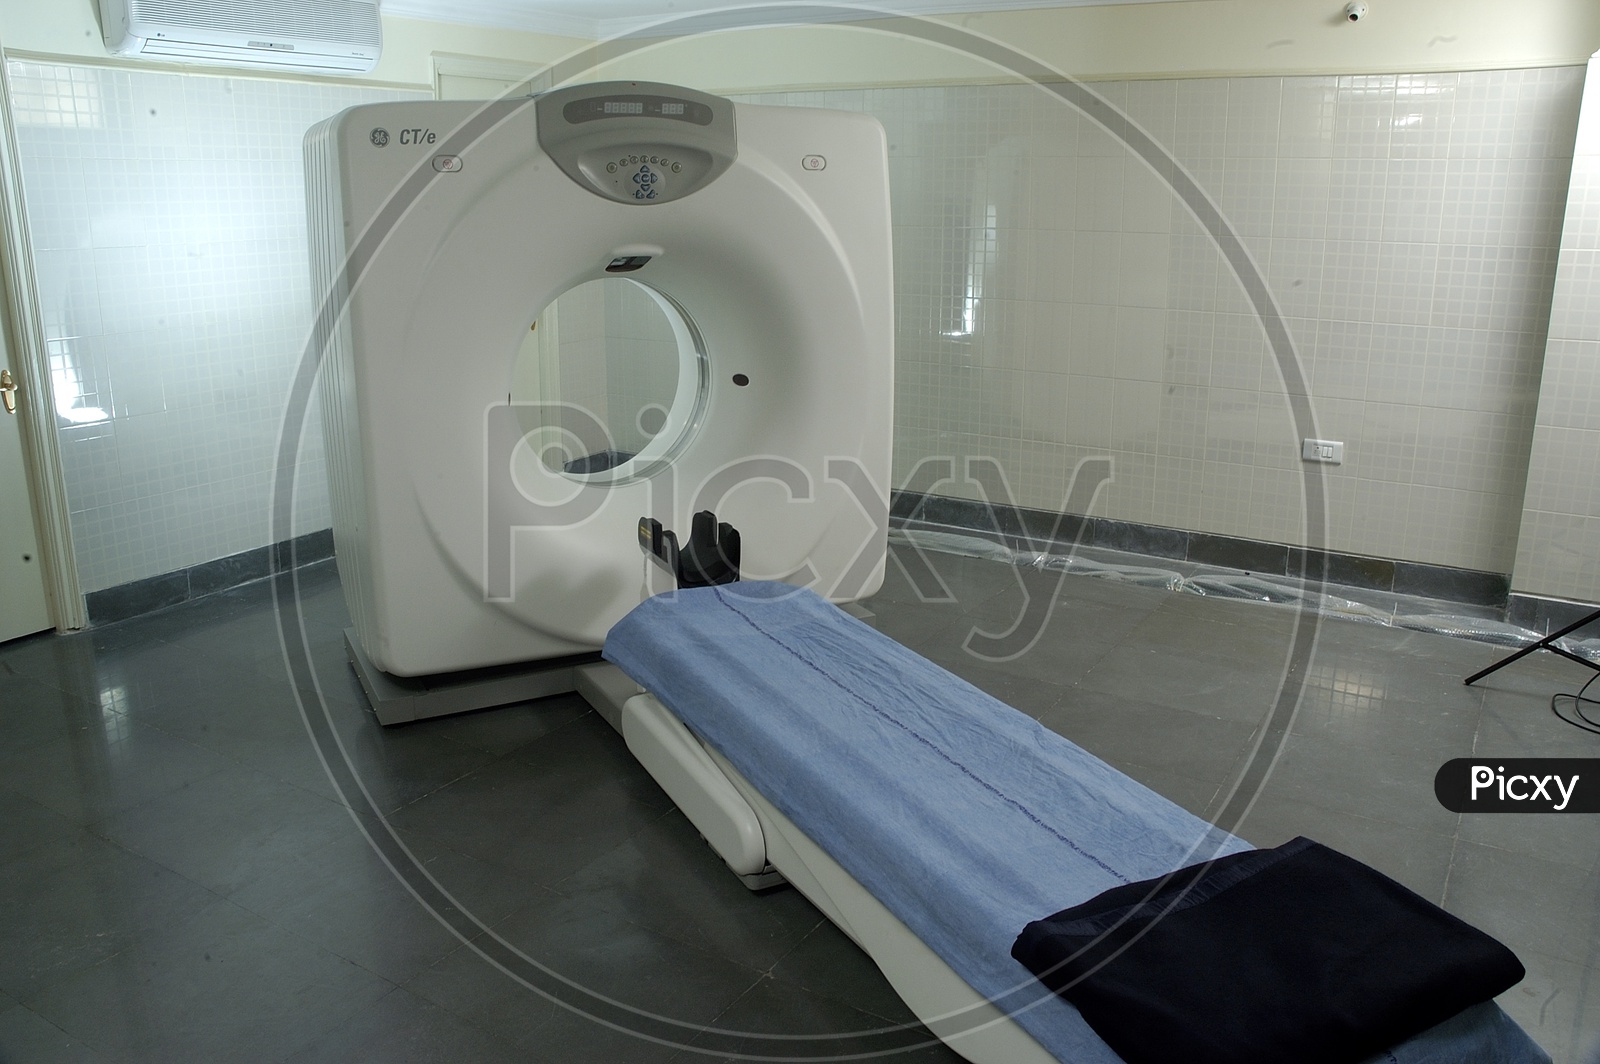 CT - Computerized Tomography Scan Device in Hospital